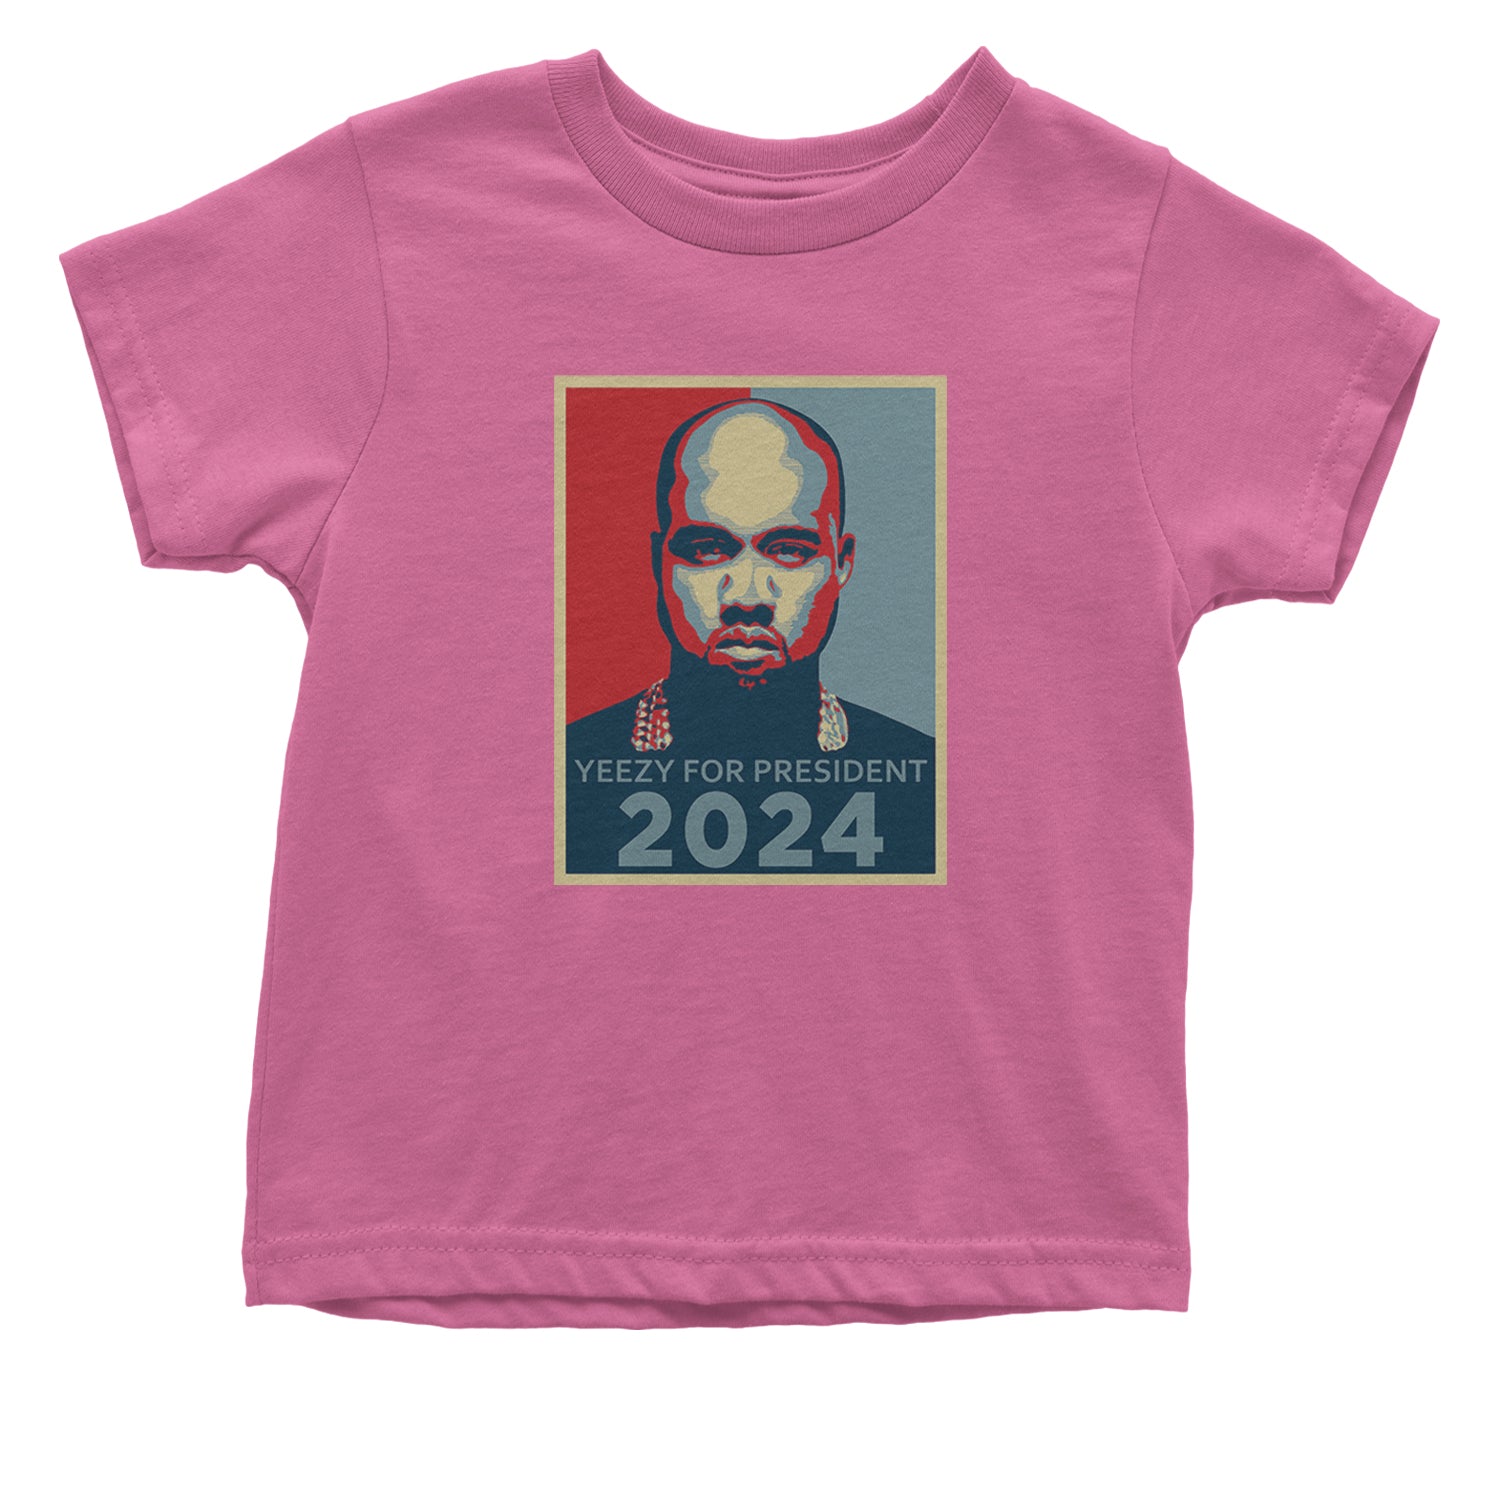 Yeezus For President Vote for Ye Infant One-Piece Romper Bodysuit and Toddler T-shirt Raspberry